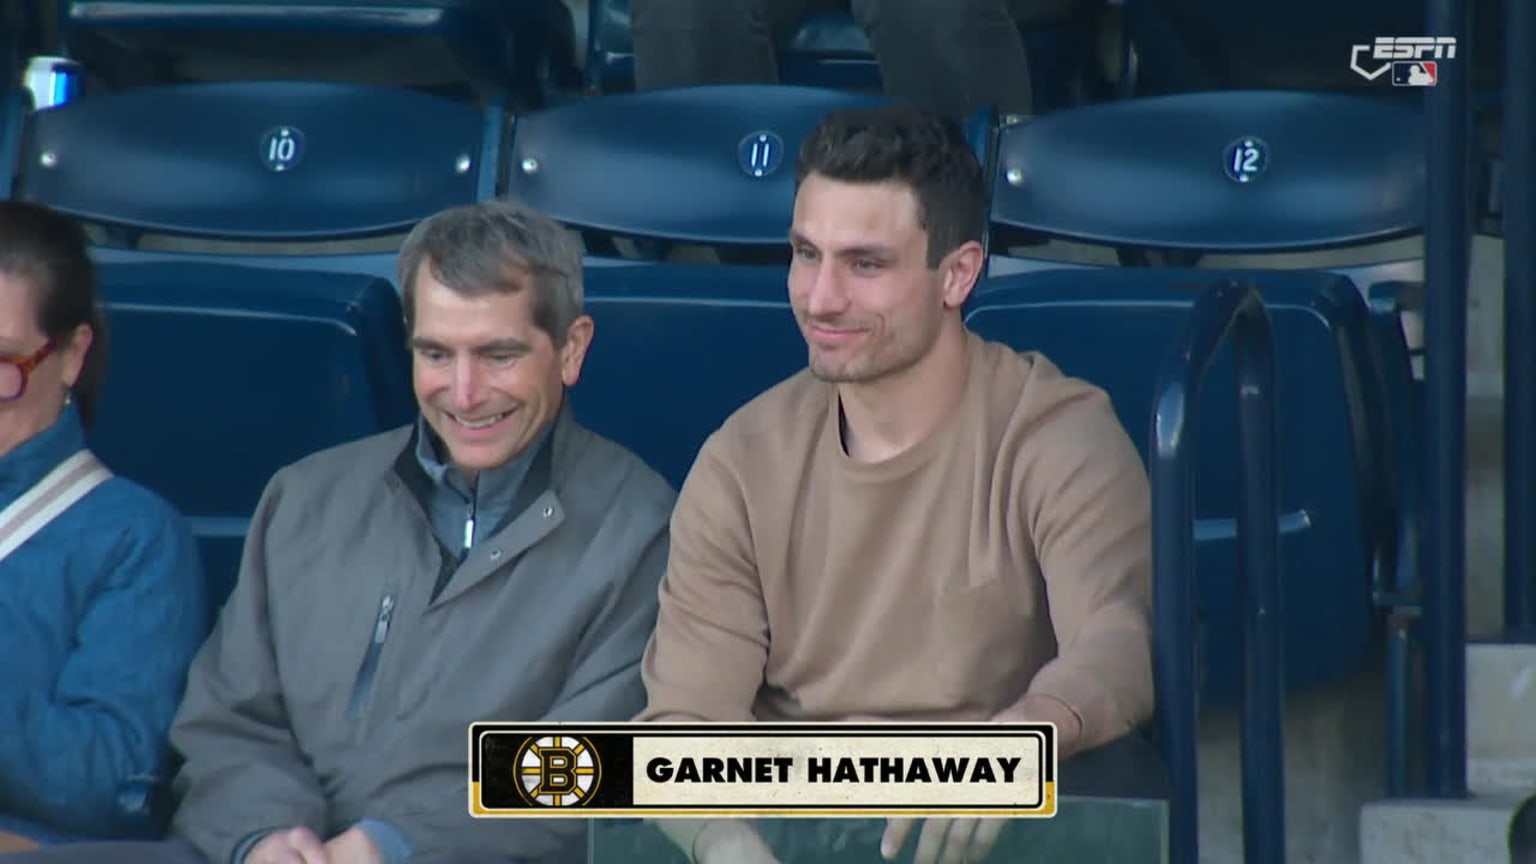 NHL winger Garnet Hathaway snares foul ball at Red Sox game